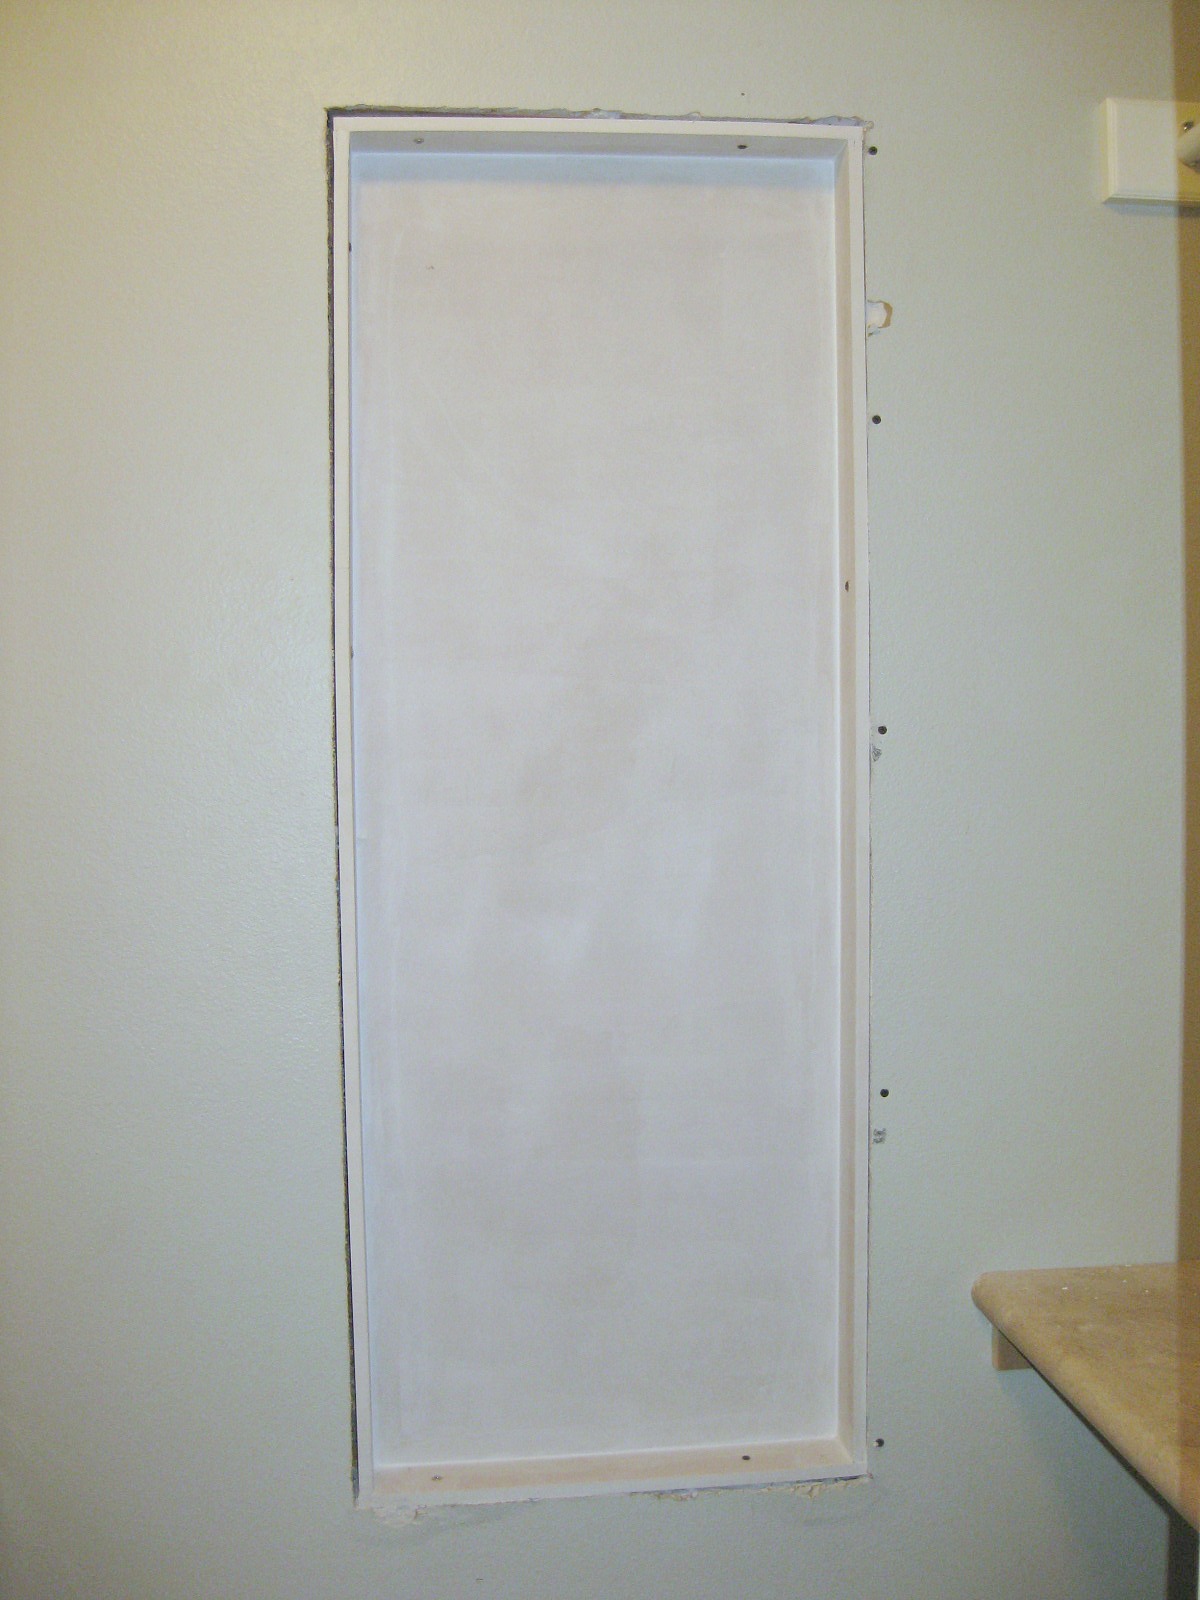 TDA decorating and design: Building An In The Wall Ironing Board 